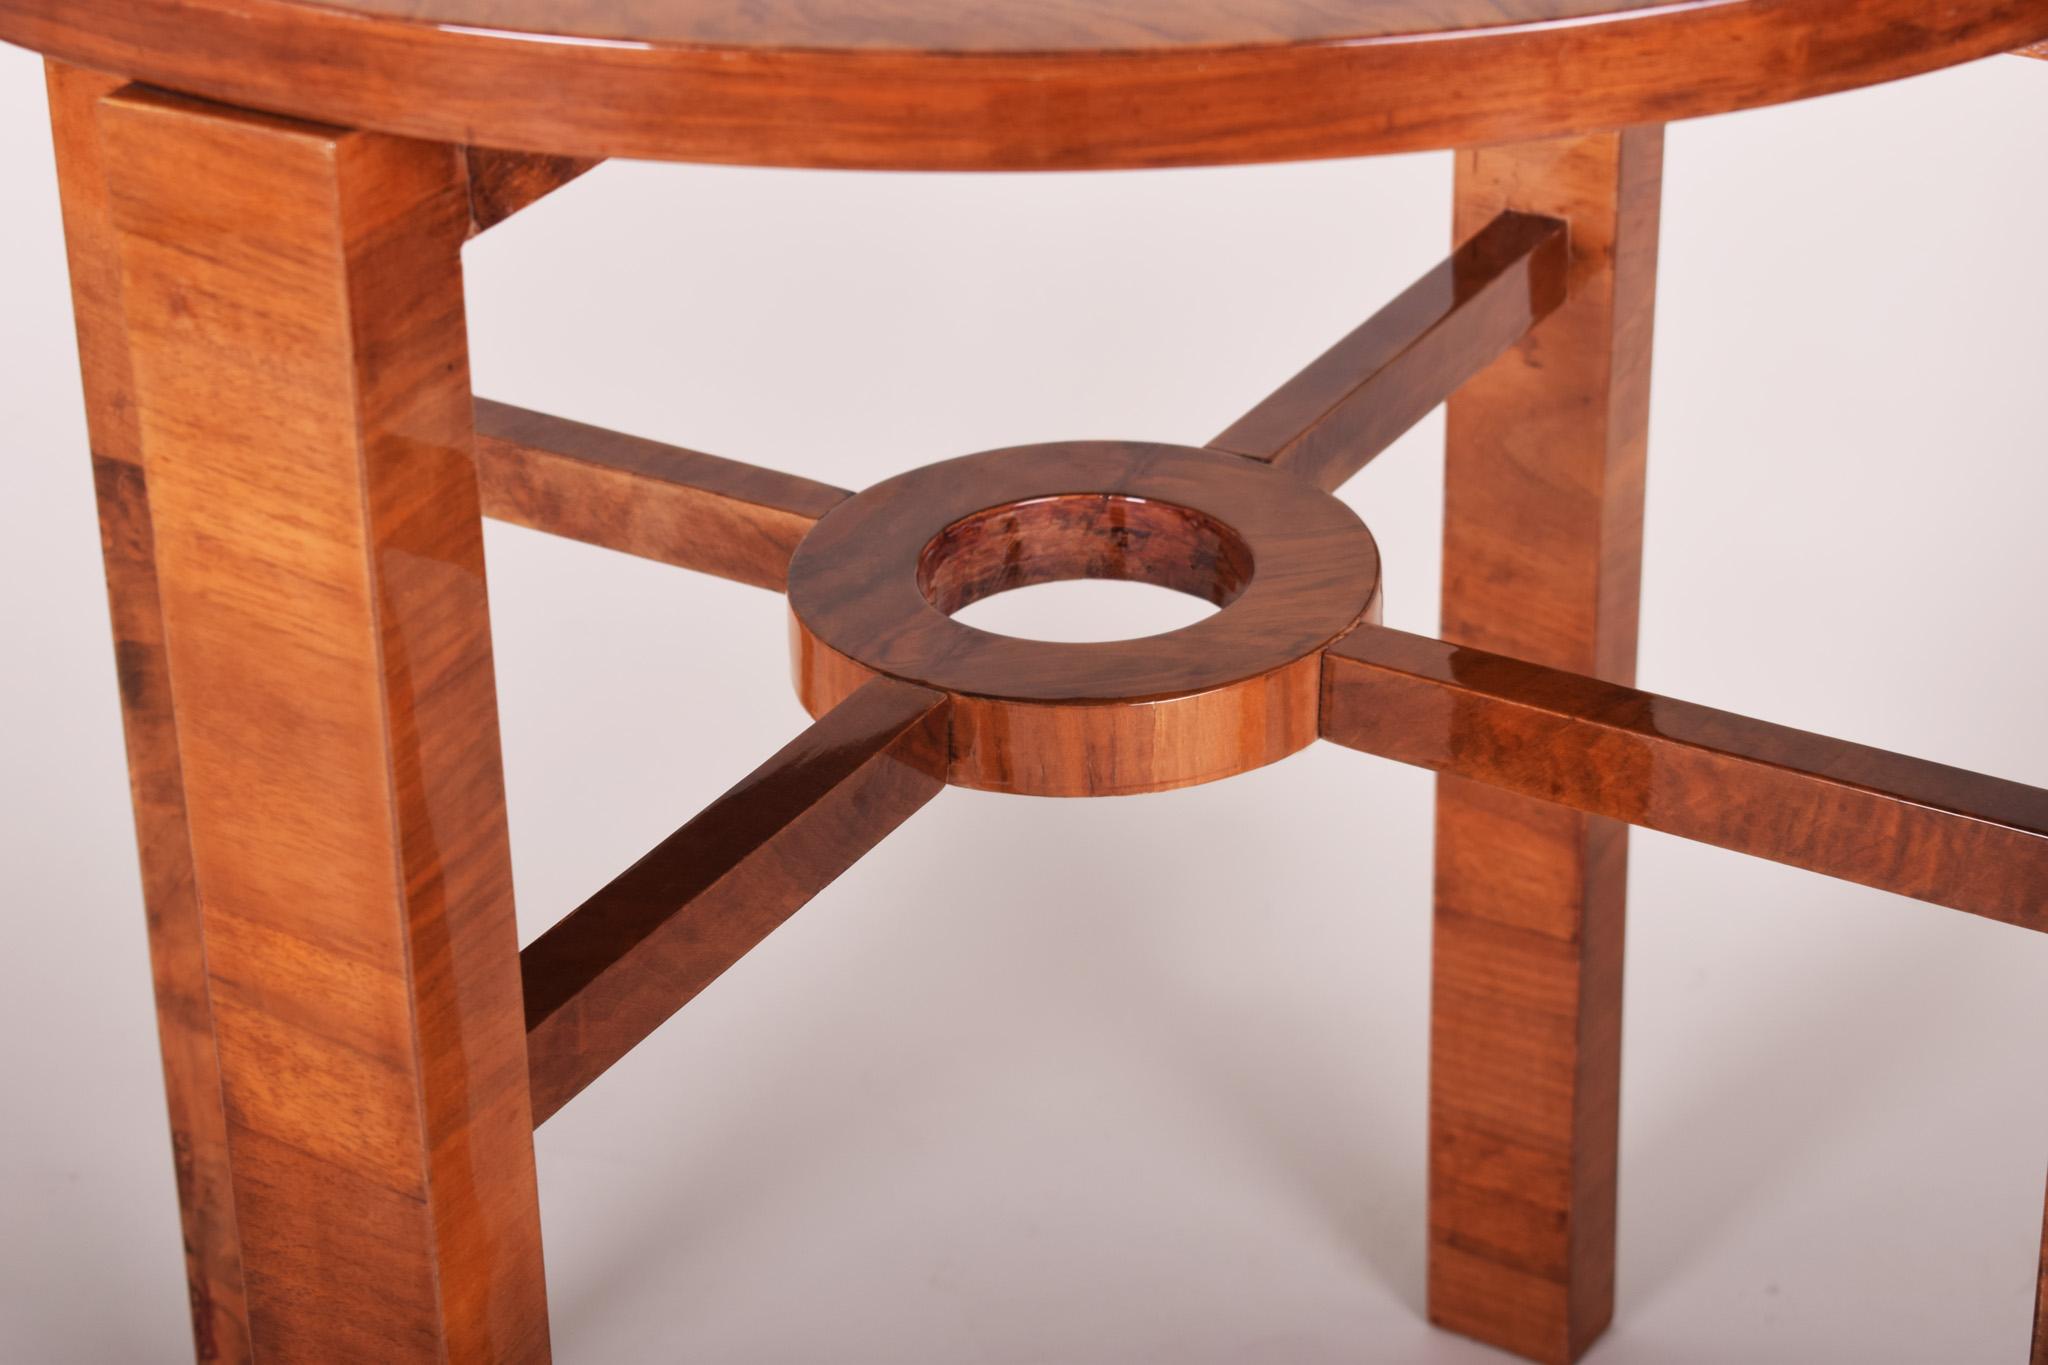 Mid-20th Century Small German Art Deco Table, 1930s, Walnut, Fully Restored For Sale